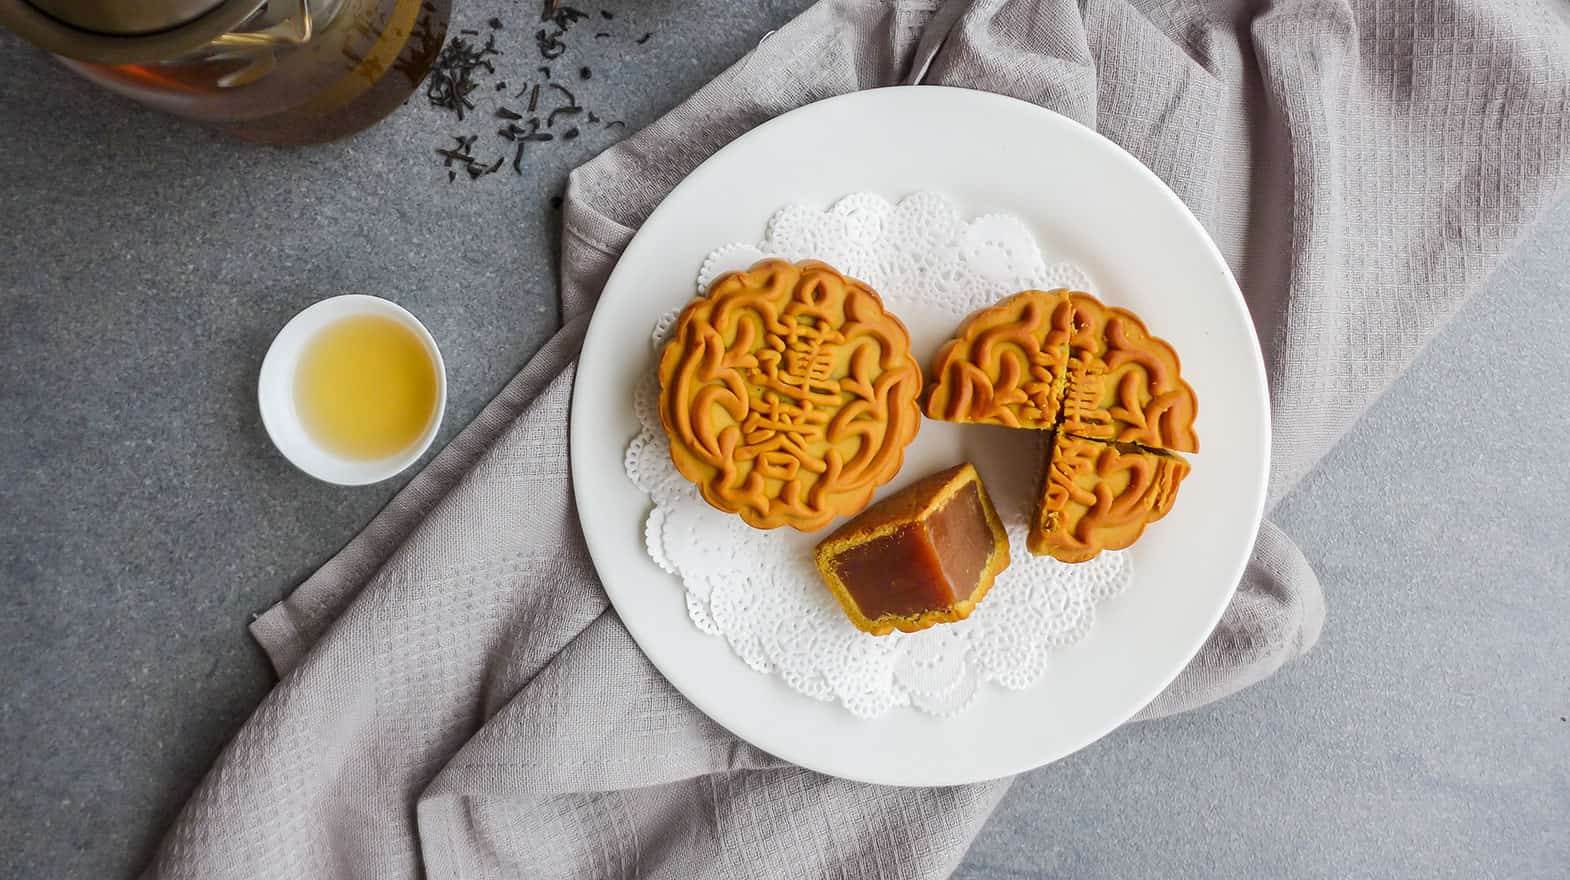 Chinese Mooncake Recipe for 2020